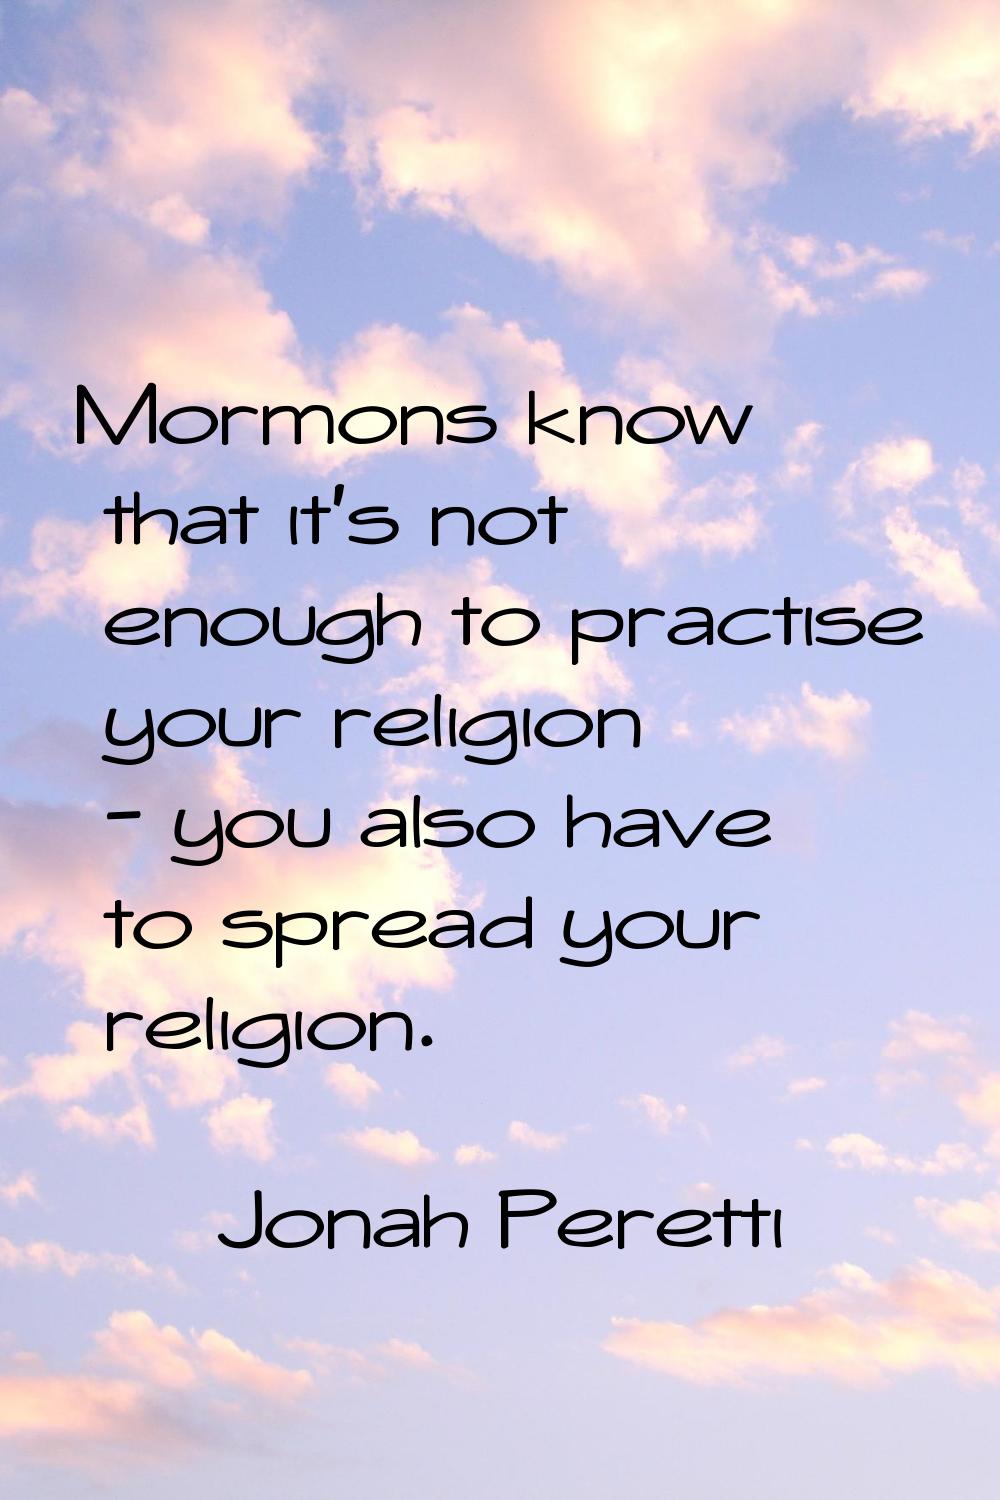 Mormons know that it's not enough to practise your religion - you also have to spread your religion